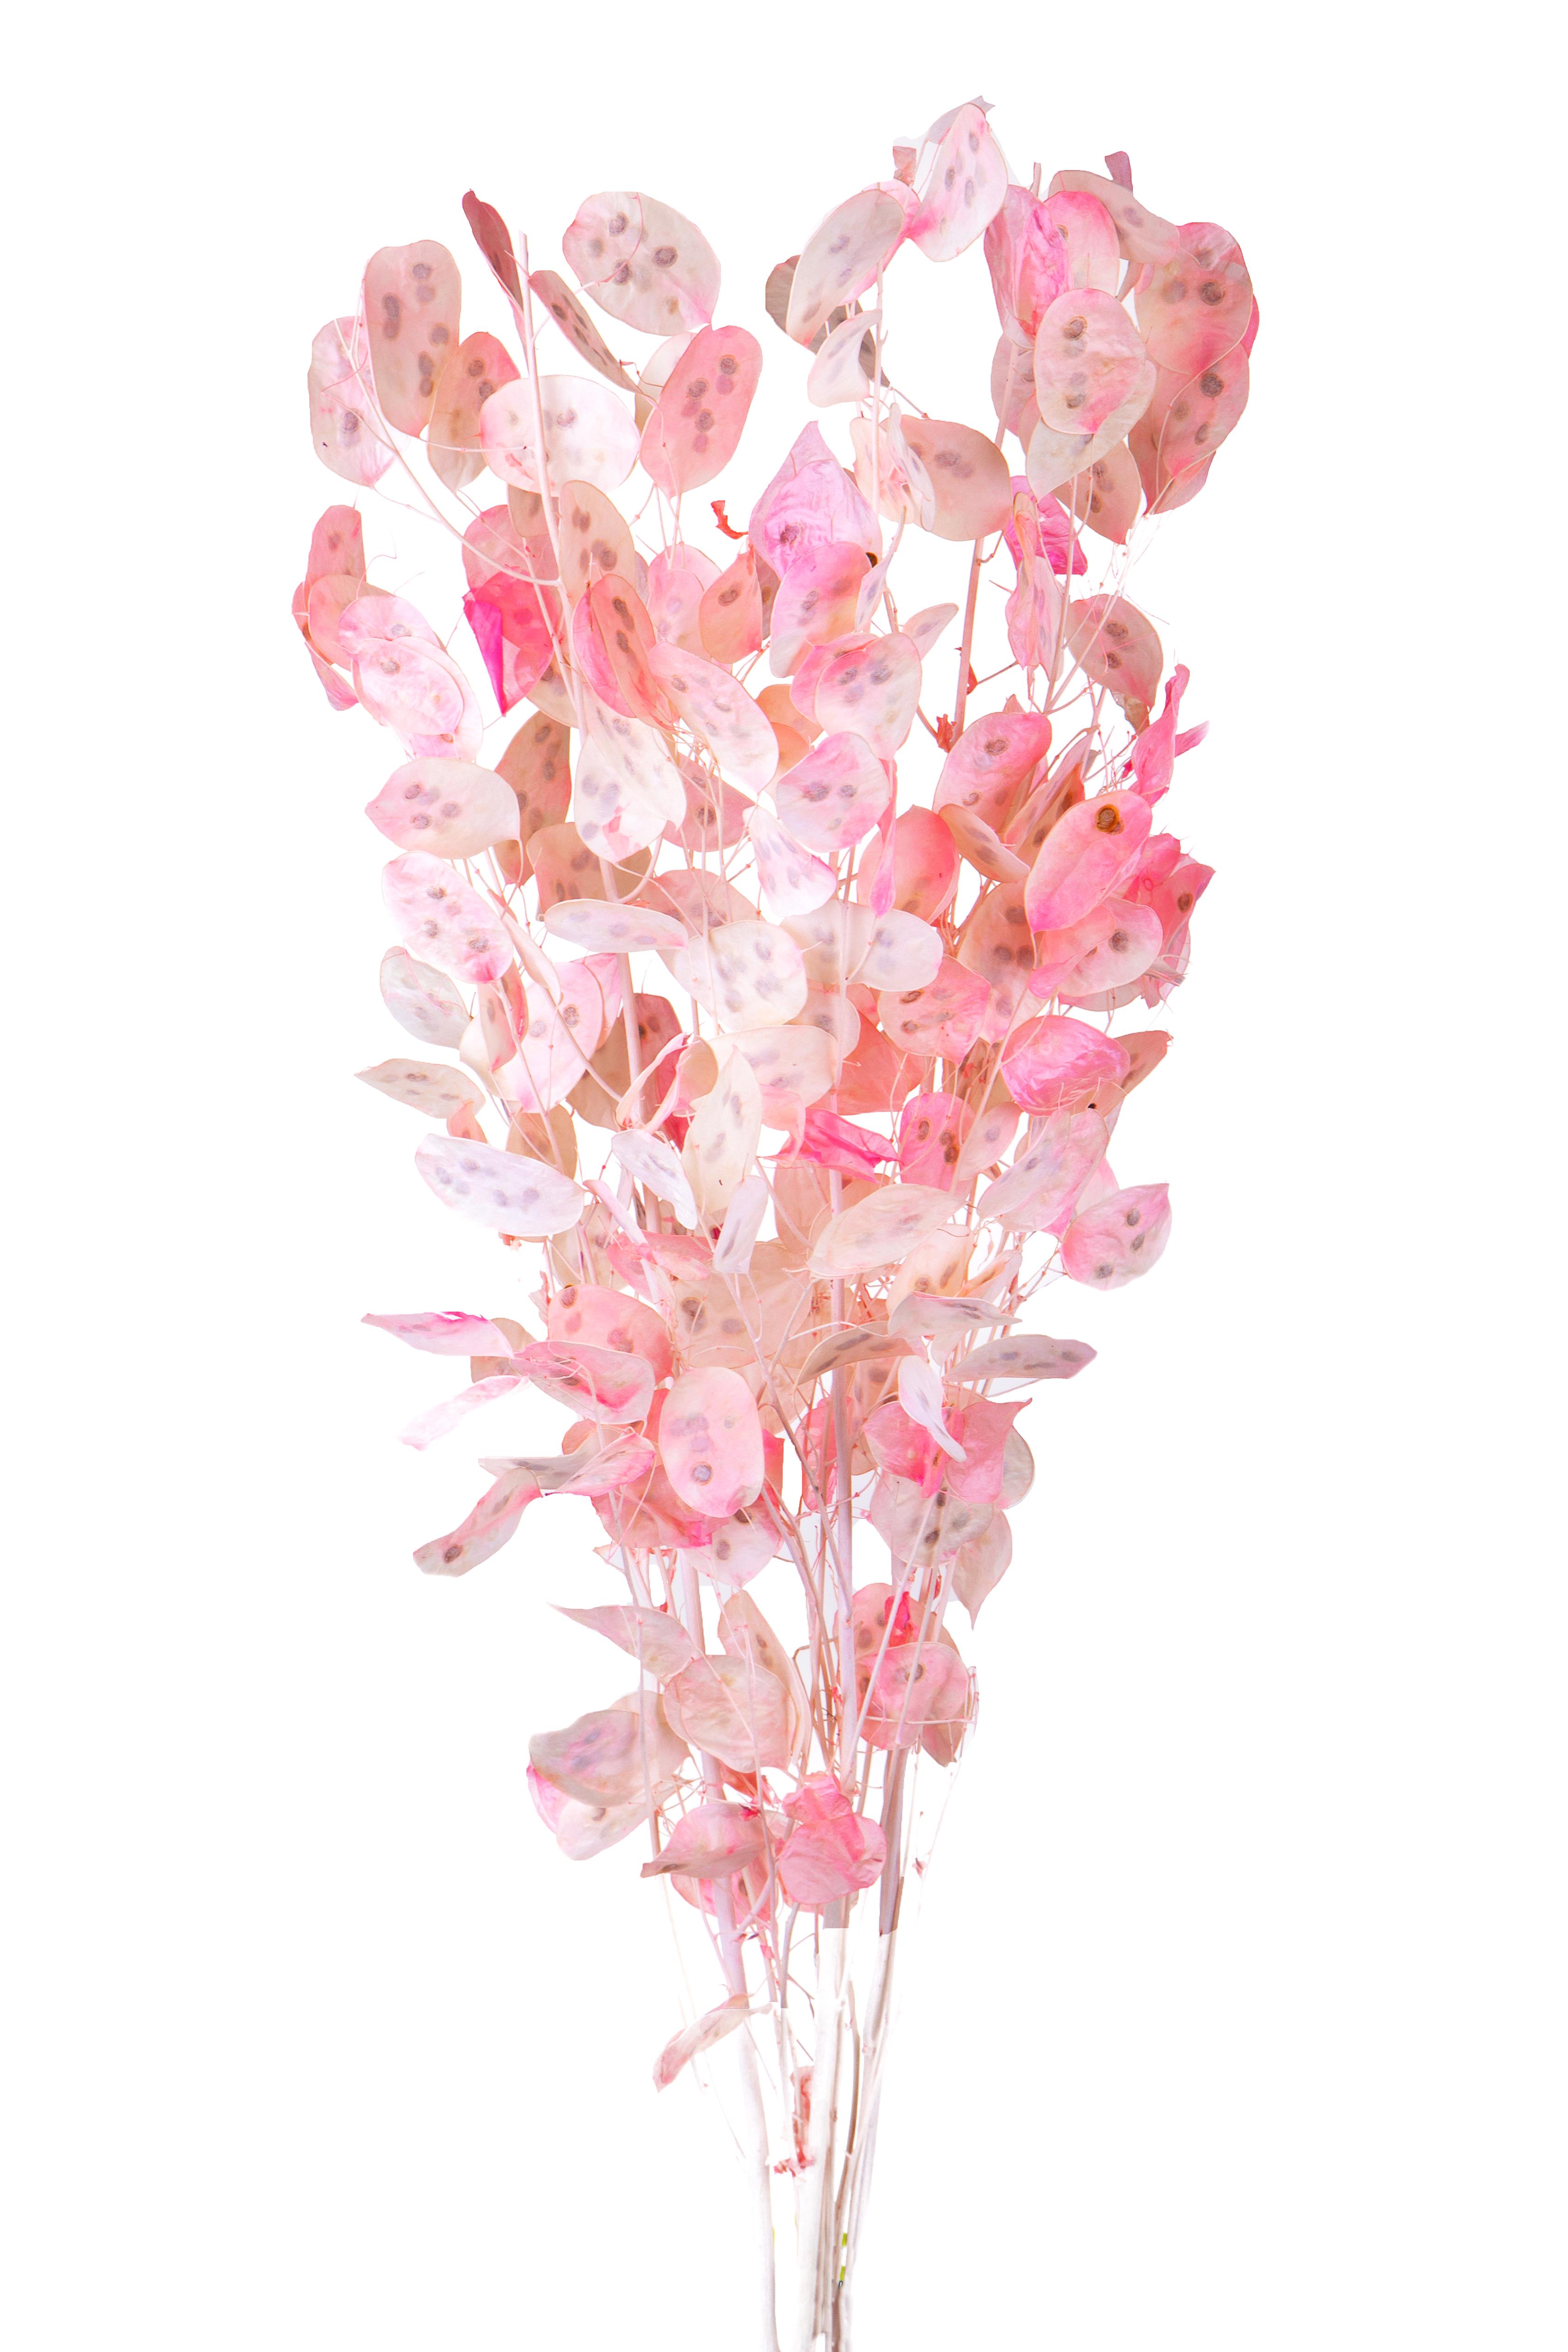 NATURAL PRODUCTS DRIED FLOWERS AND ERBS, COLORED GRASS AND FLOWERS, LUNARIA REDIVIVA NON SFOGL.PASTELLO SAC